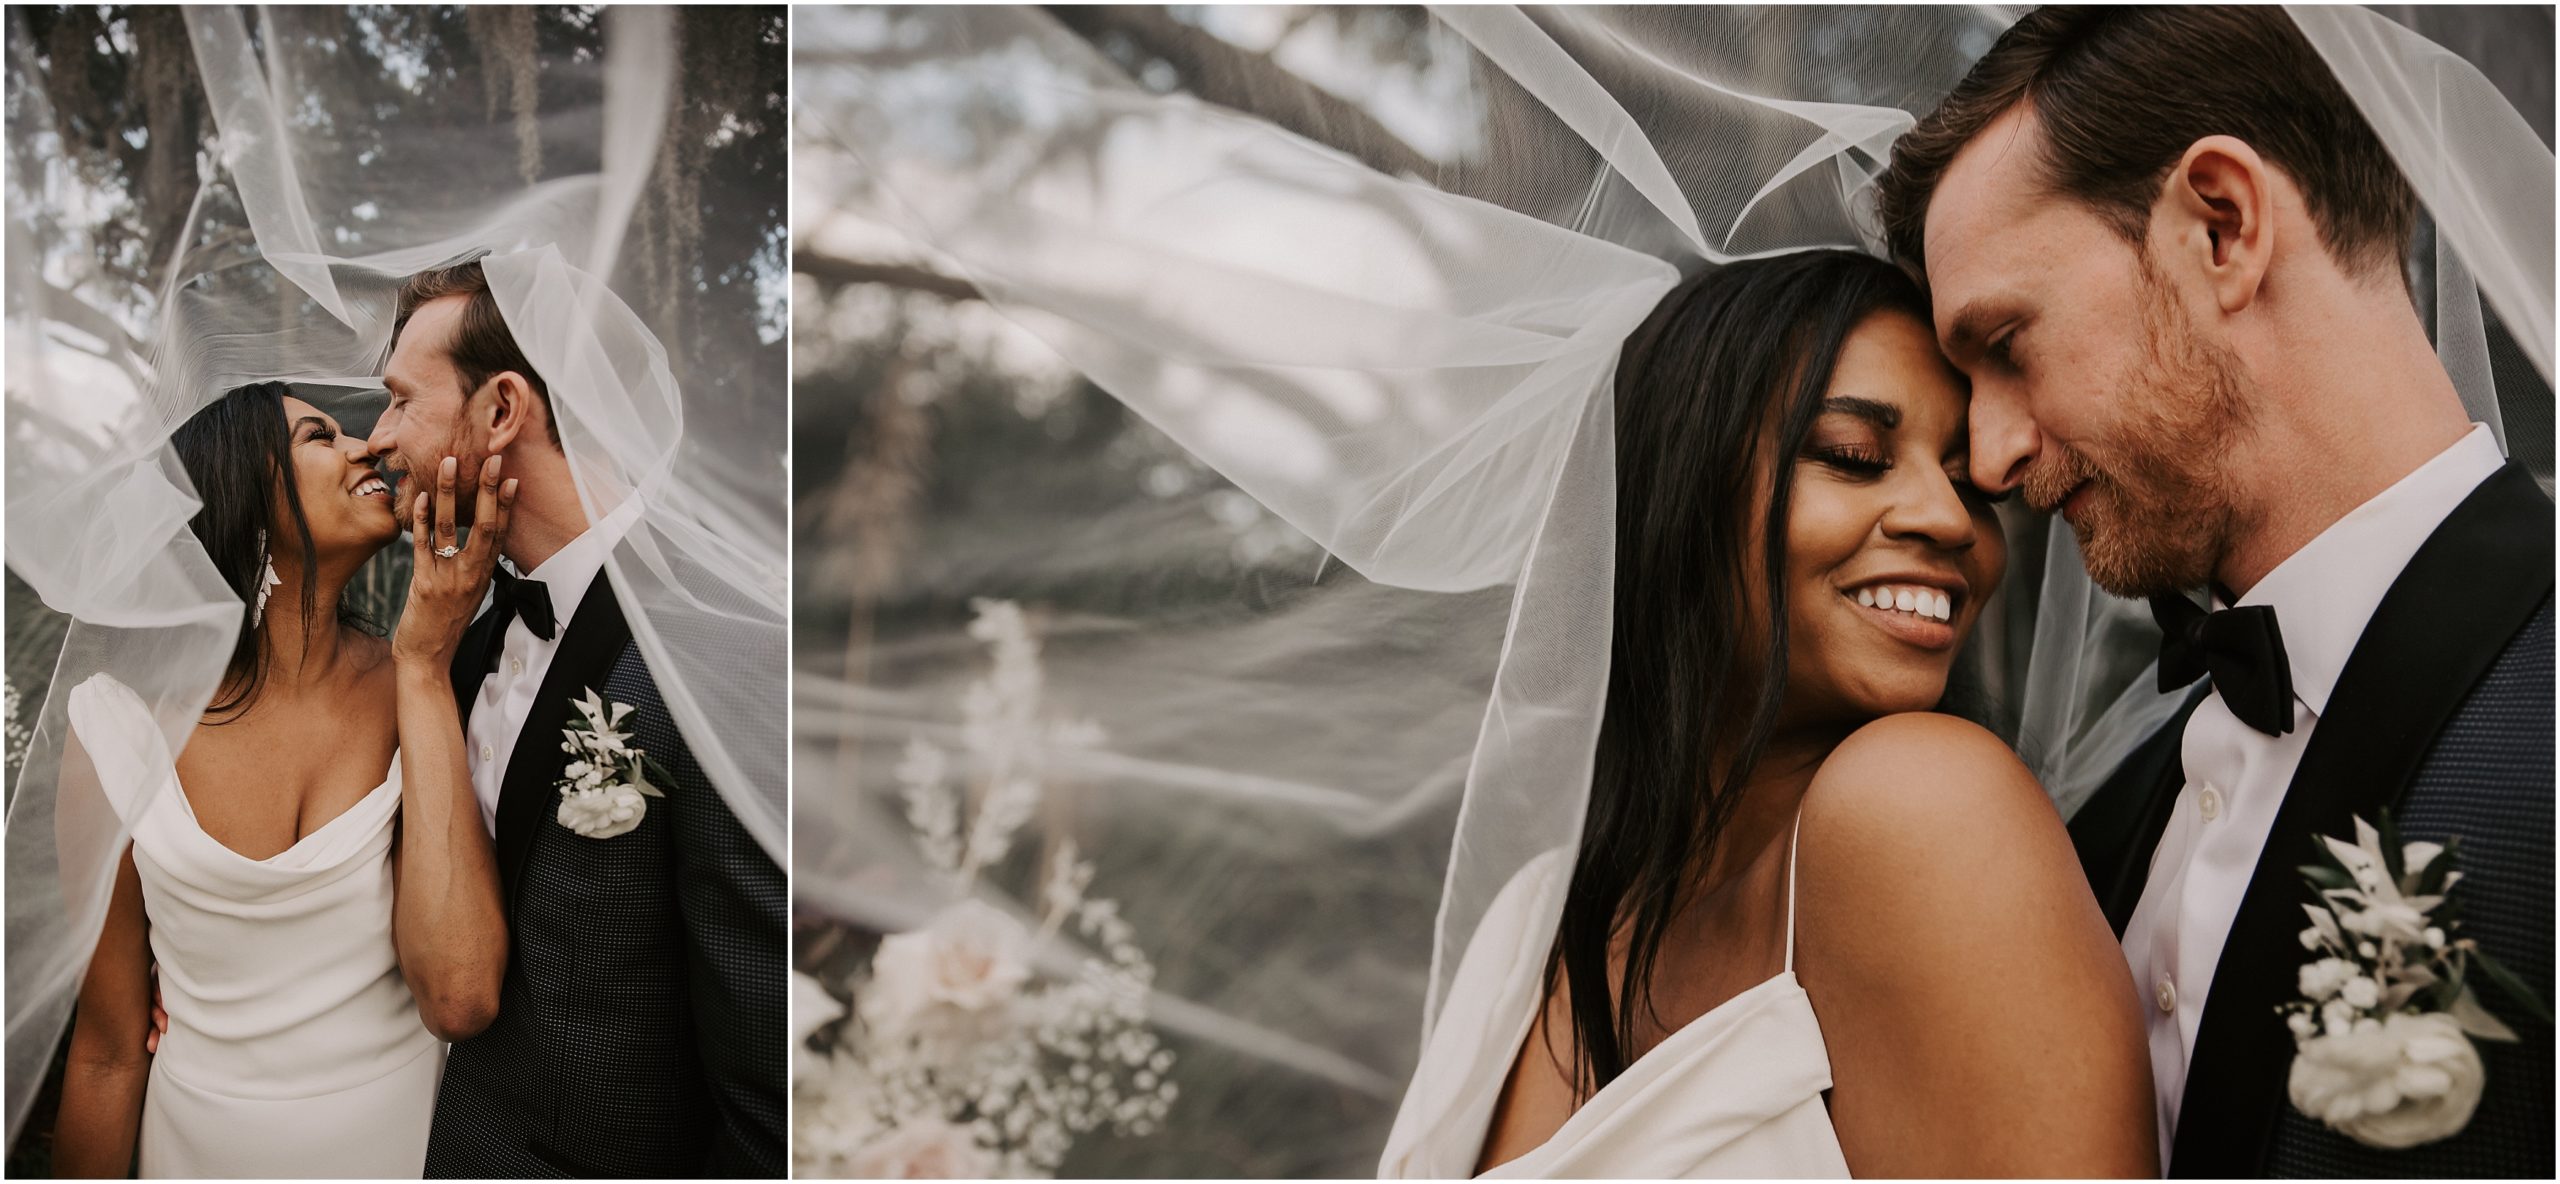 I could had some time with the couple to capture amazing portraits at the beggining of the wedding